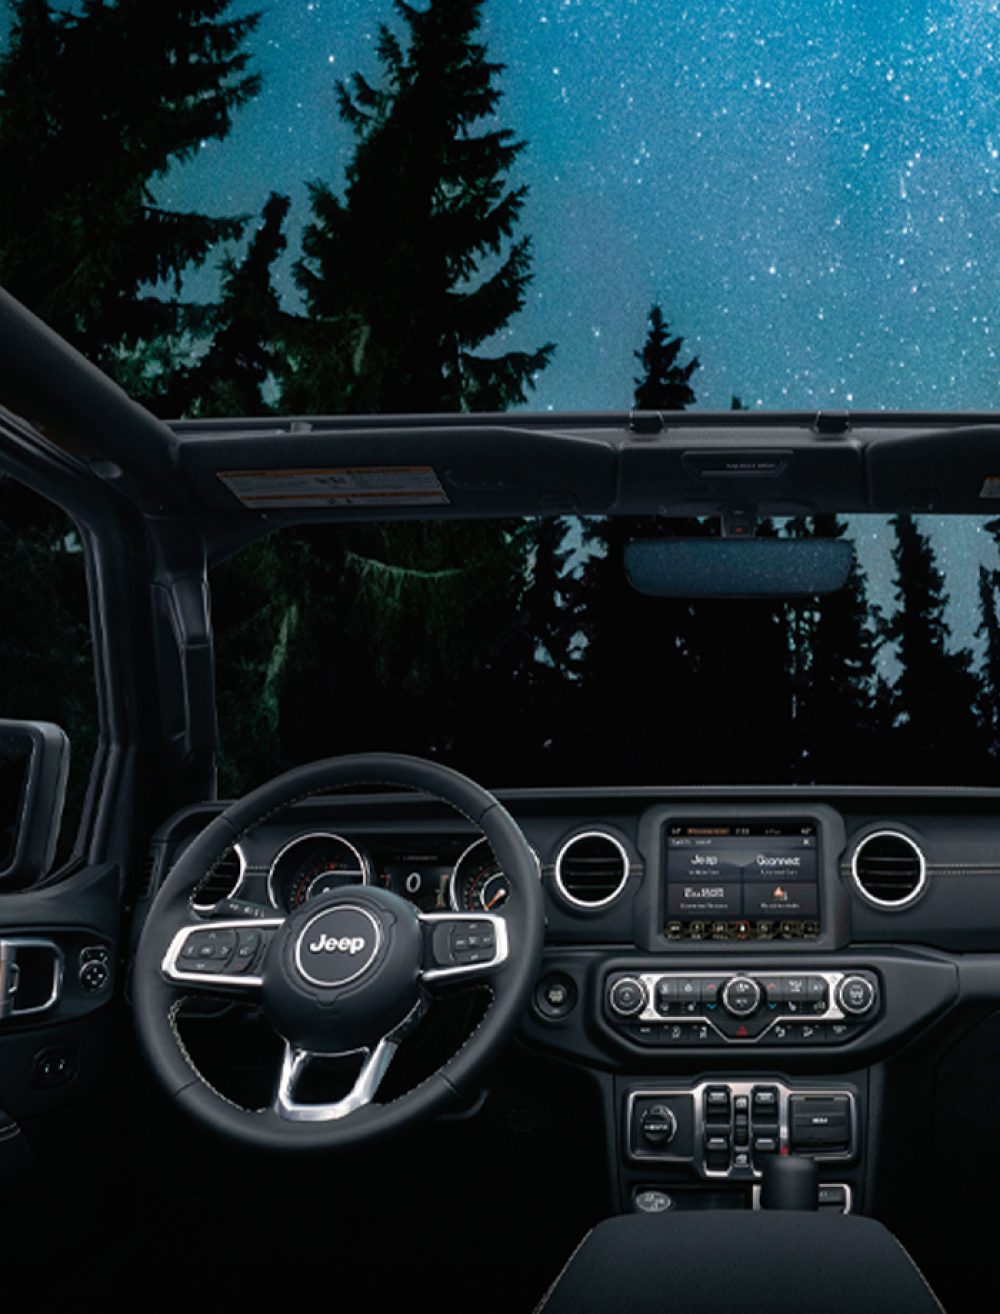 2020 Jeep® Wrangler Exceptional Interior Features